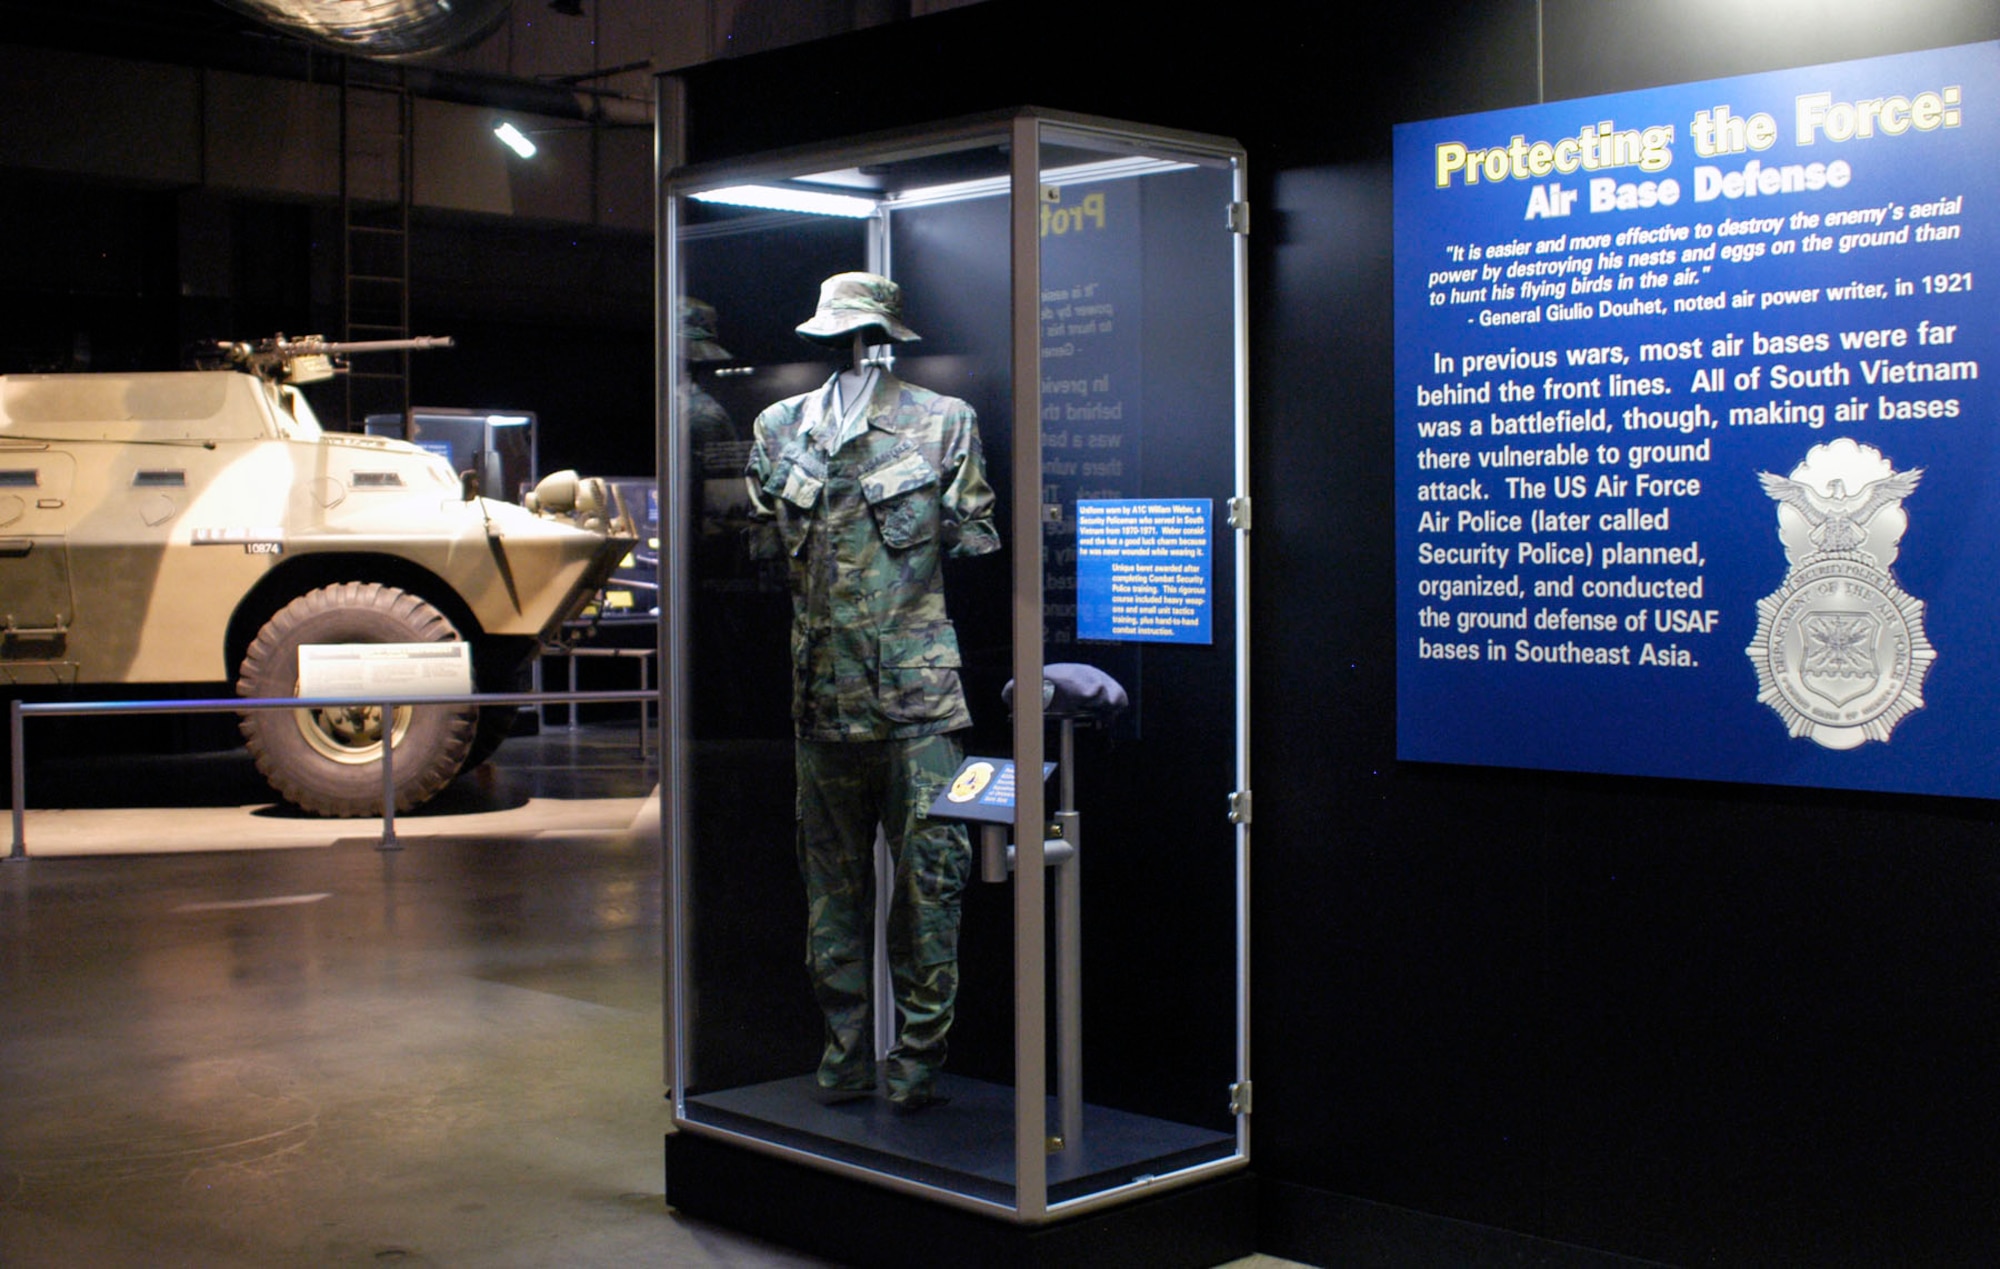 DAYTON, Ohio -- "Protecting the Force: Air Base Defense" exhibit in the Southeast Asia War Gallery at the National Museum of the U.S. Air Force. (U.S. Air Force photo)